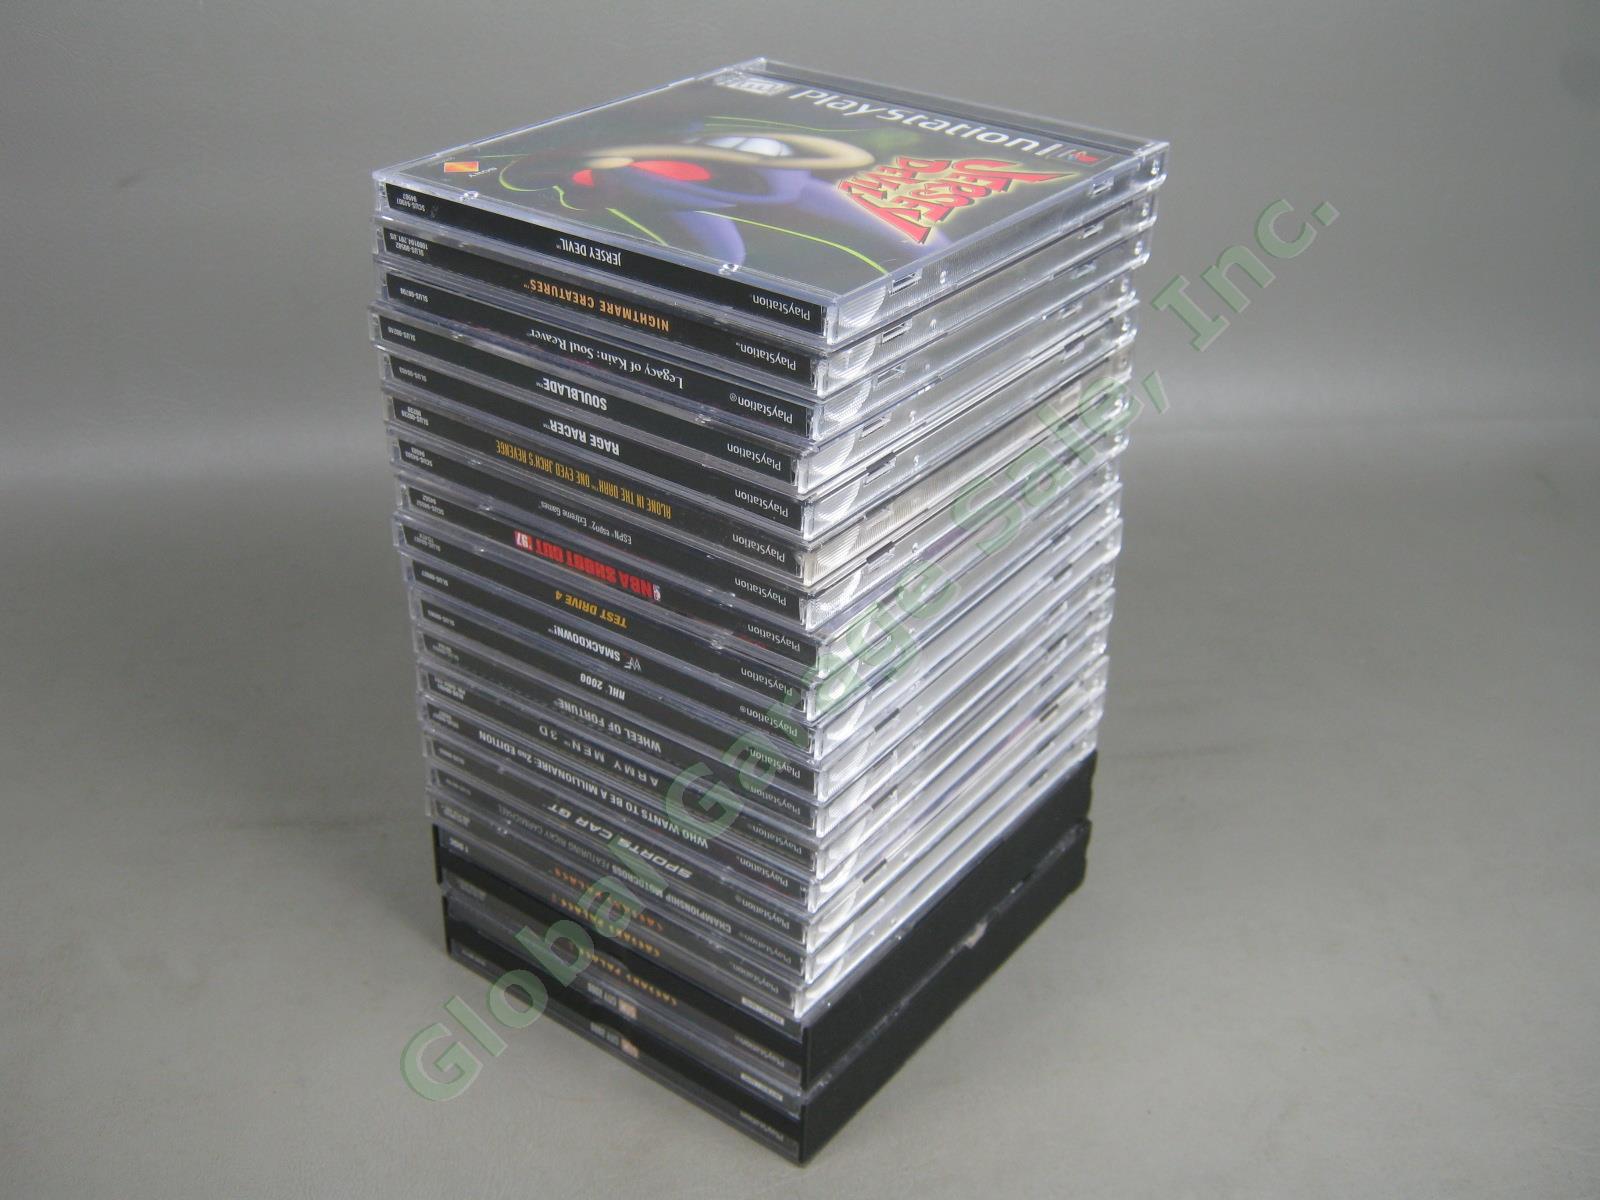 19 Sony Playstation 1 PS1 Black Label Game Lot Jersey Devil Nightmare Creatures 1